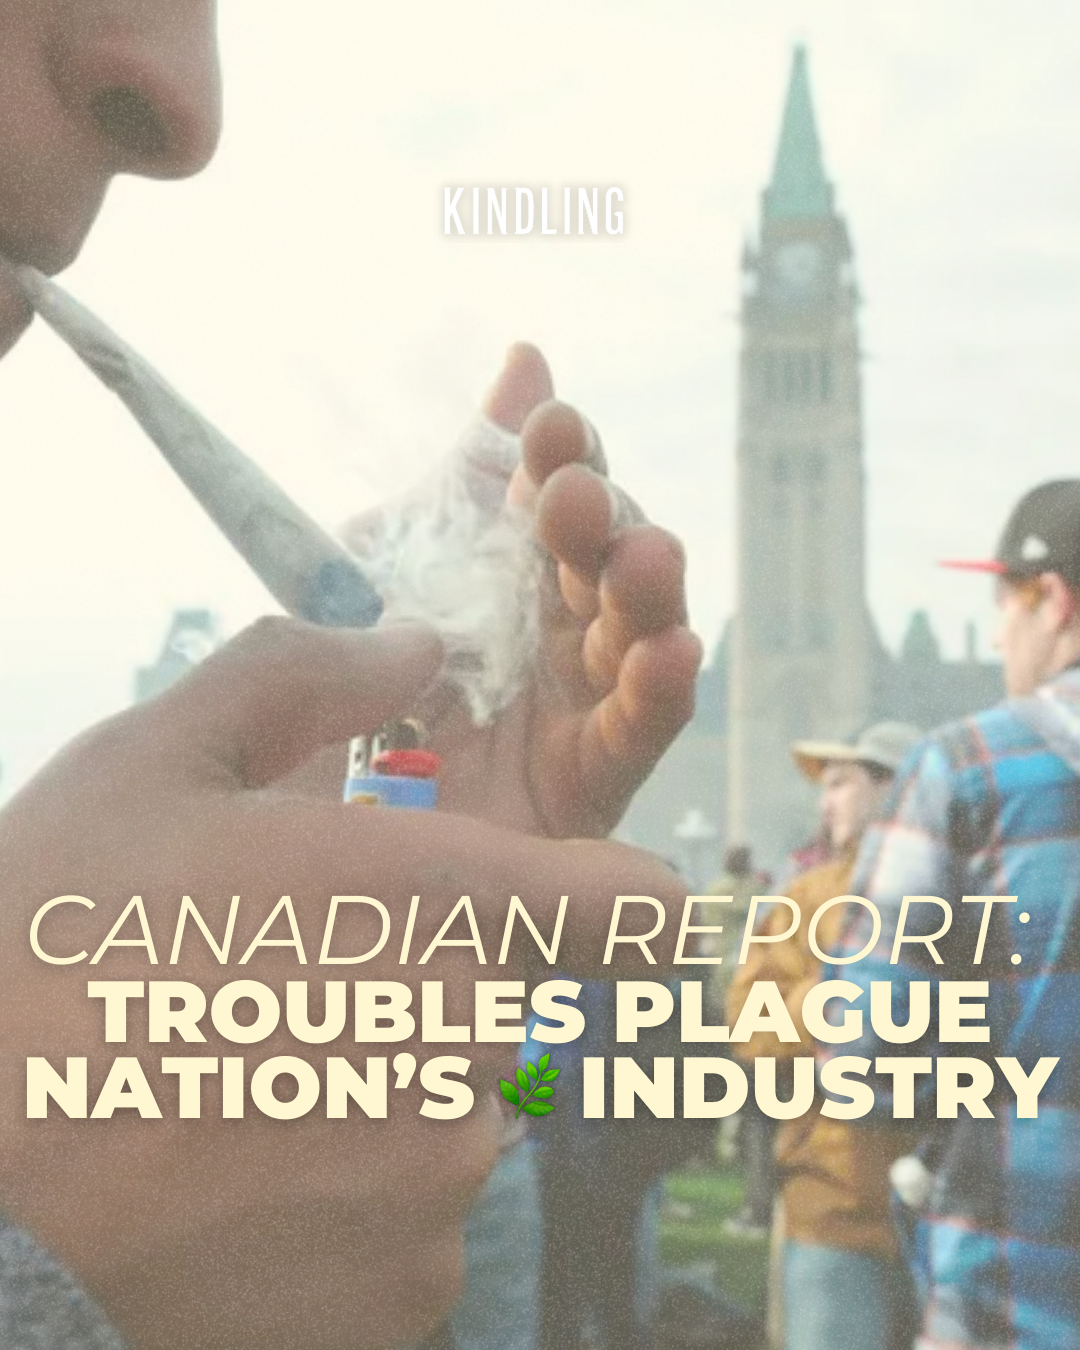 CANADIAN REPORT: TROUBLES PLAGUE NATION’S CANNABIS INDUSTRY